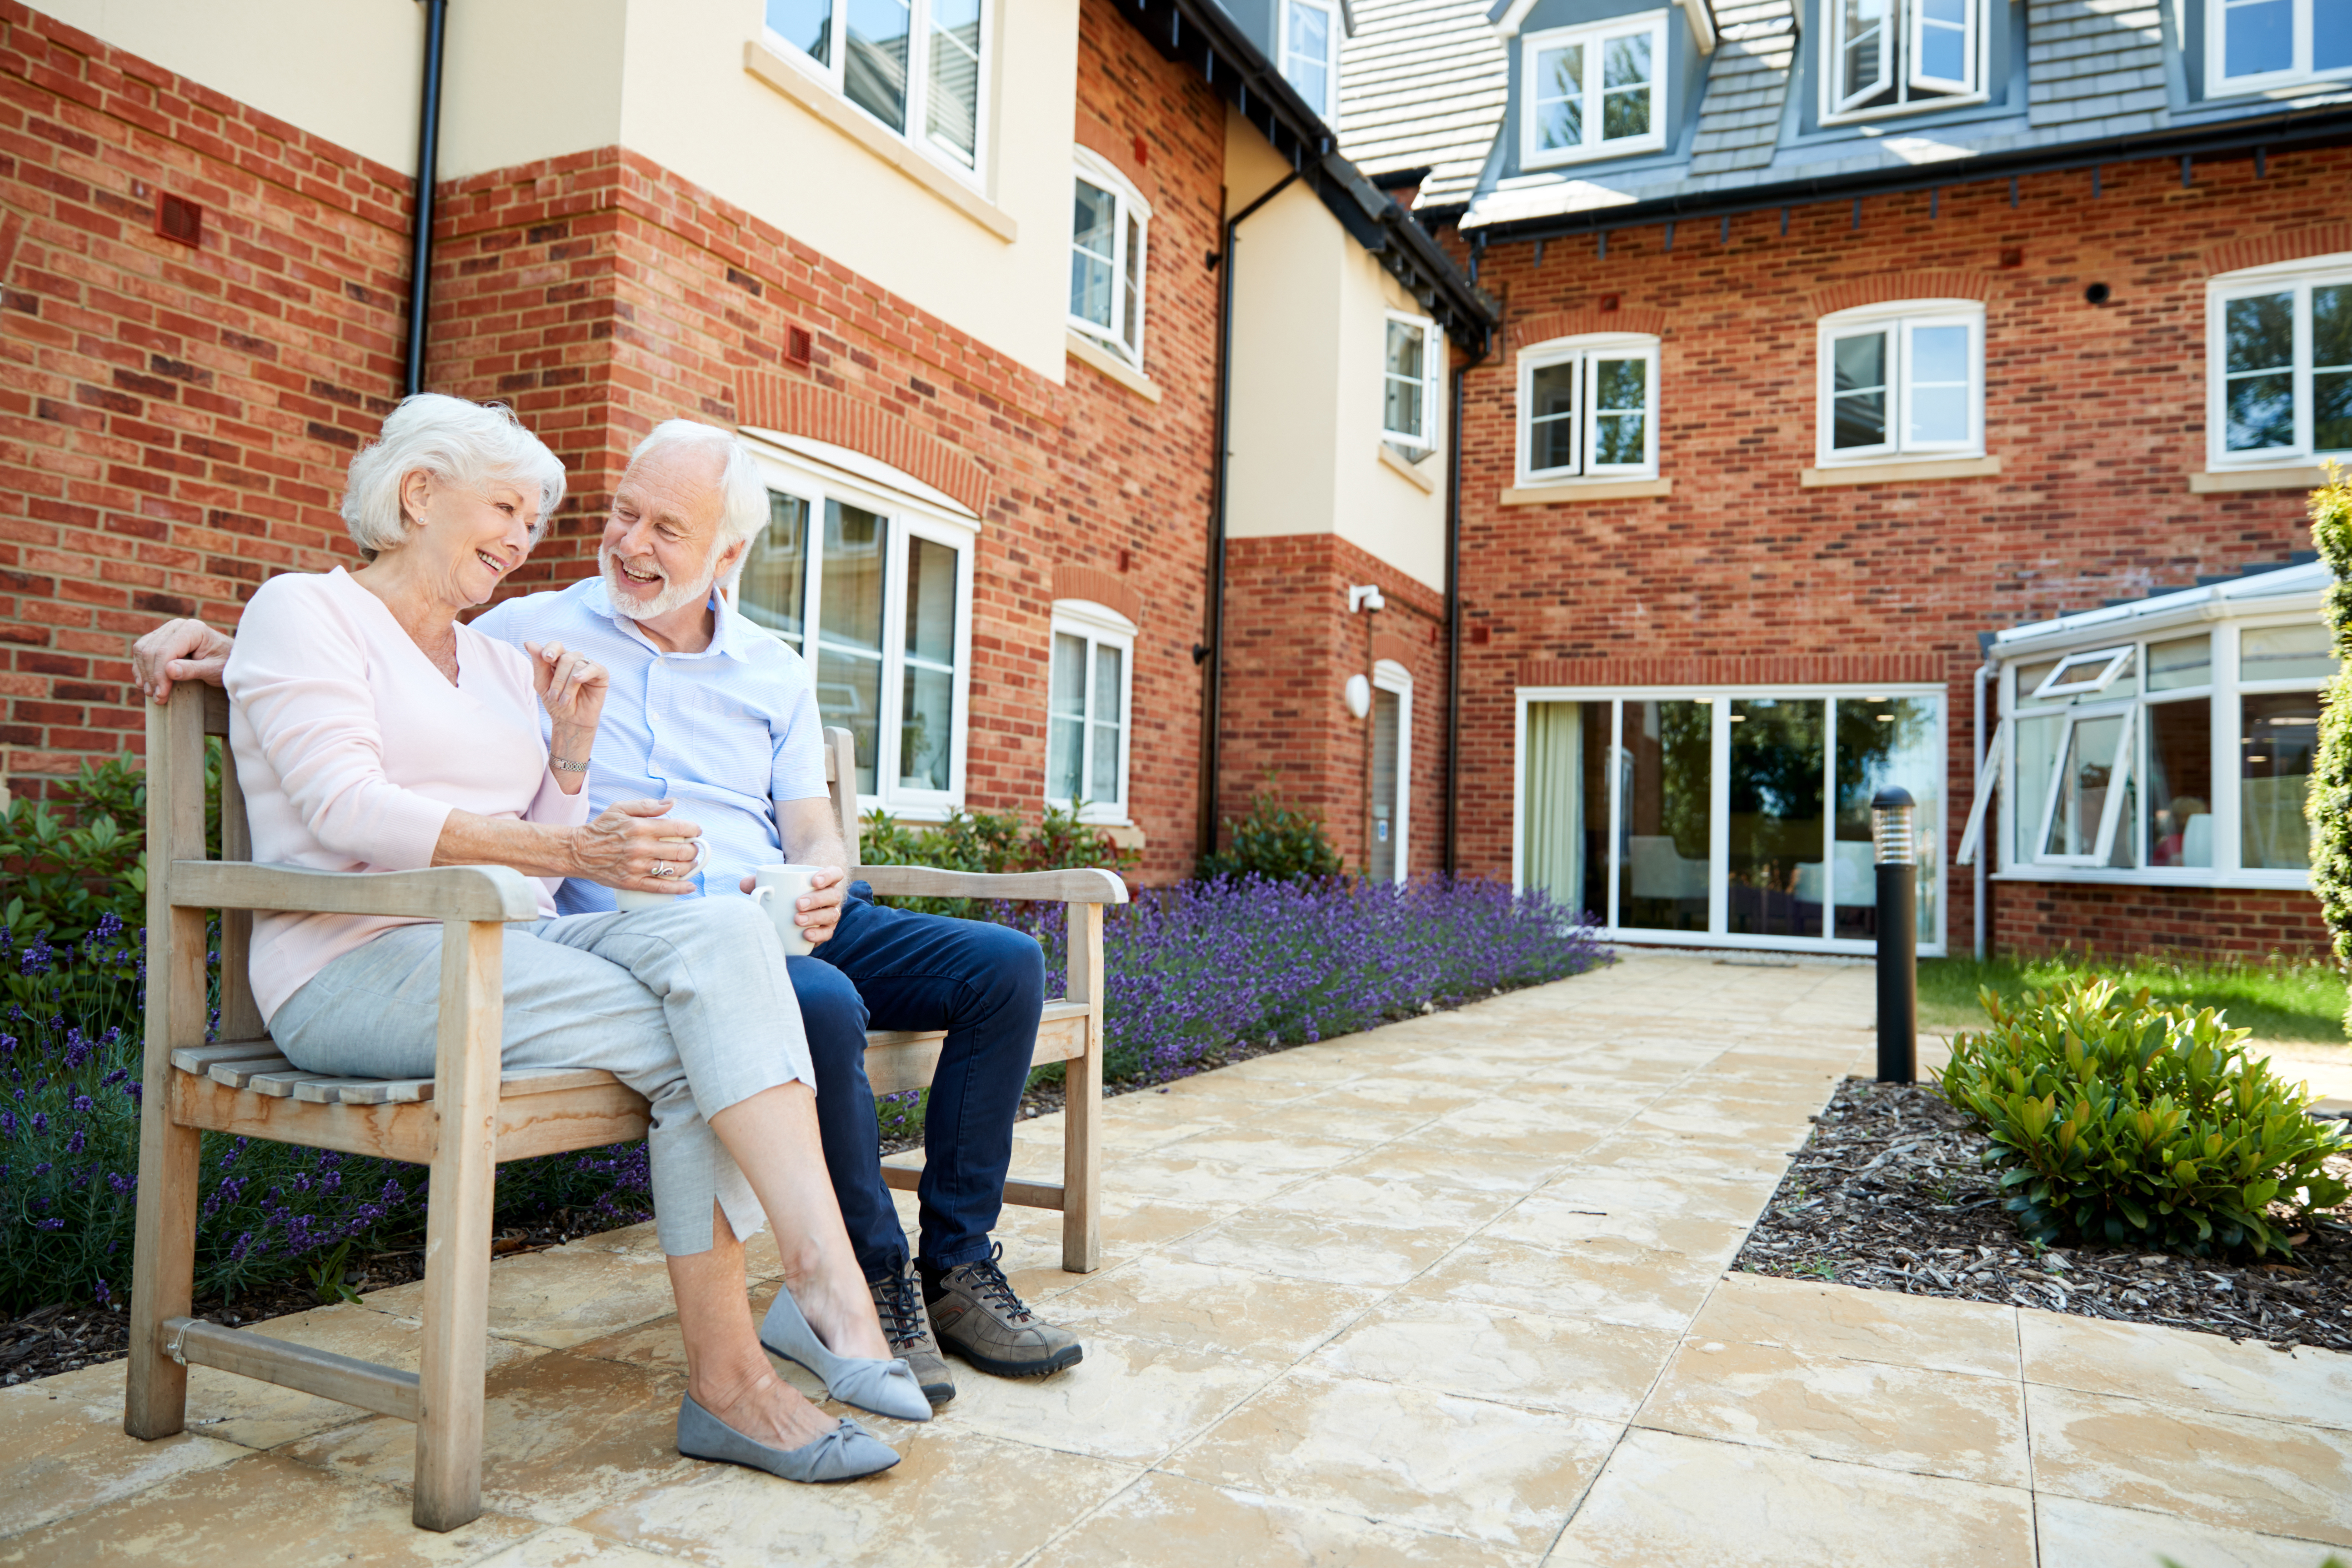 12 million and growing – will the senior housing challenge finally receive some attention?